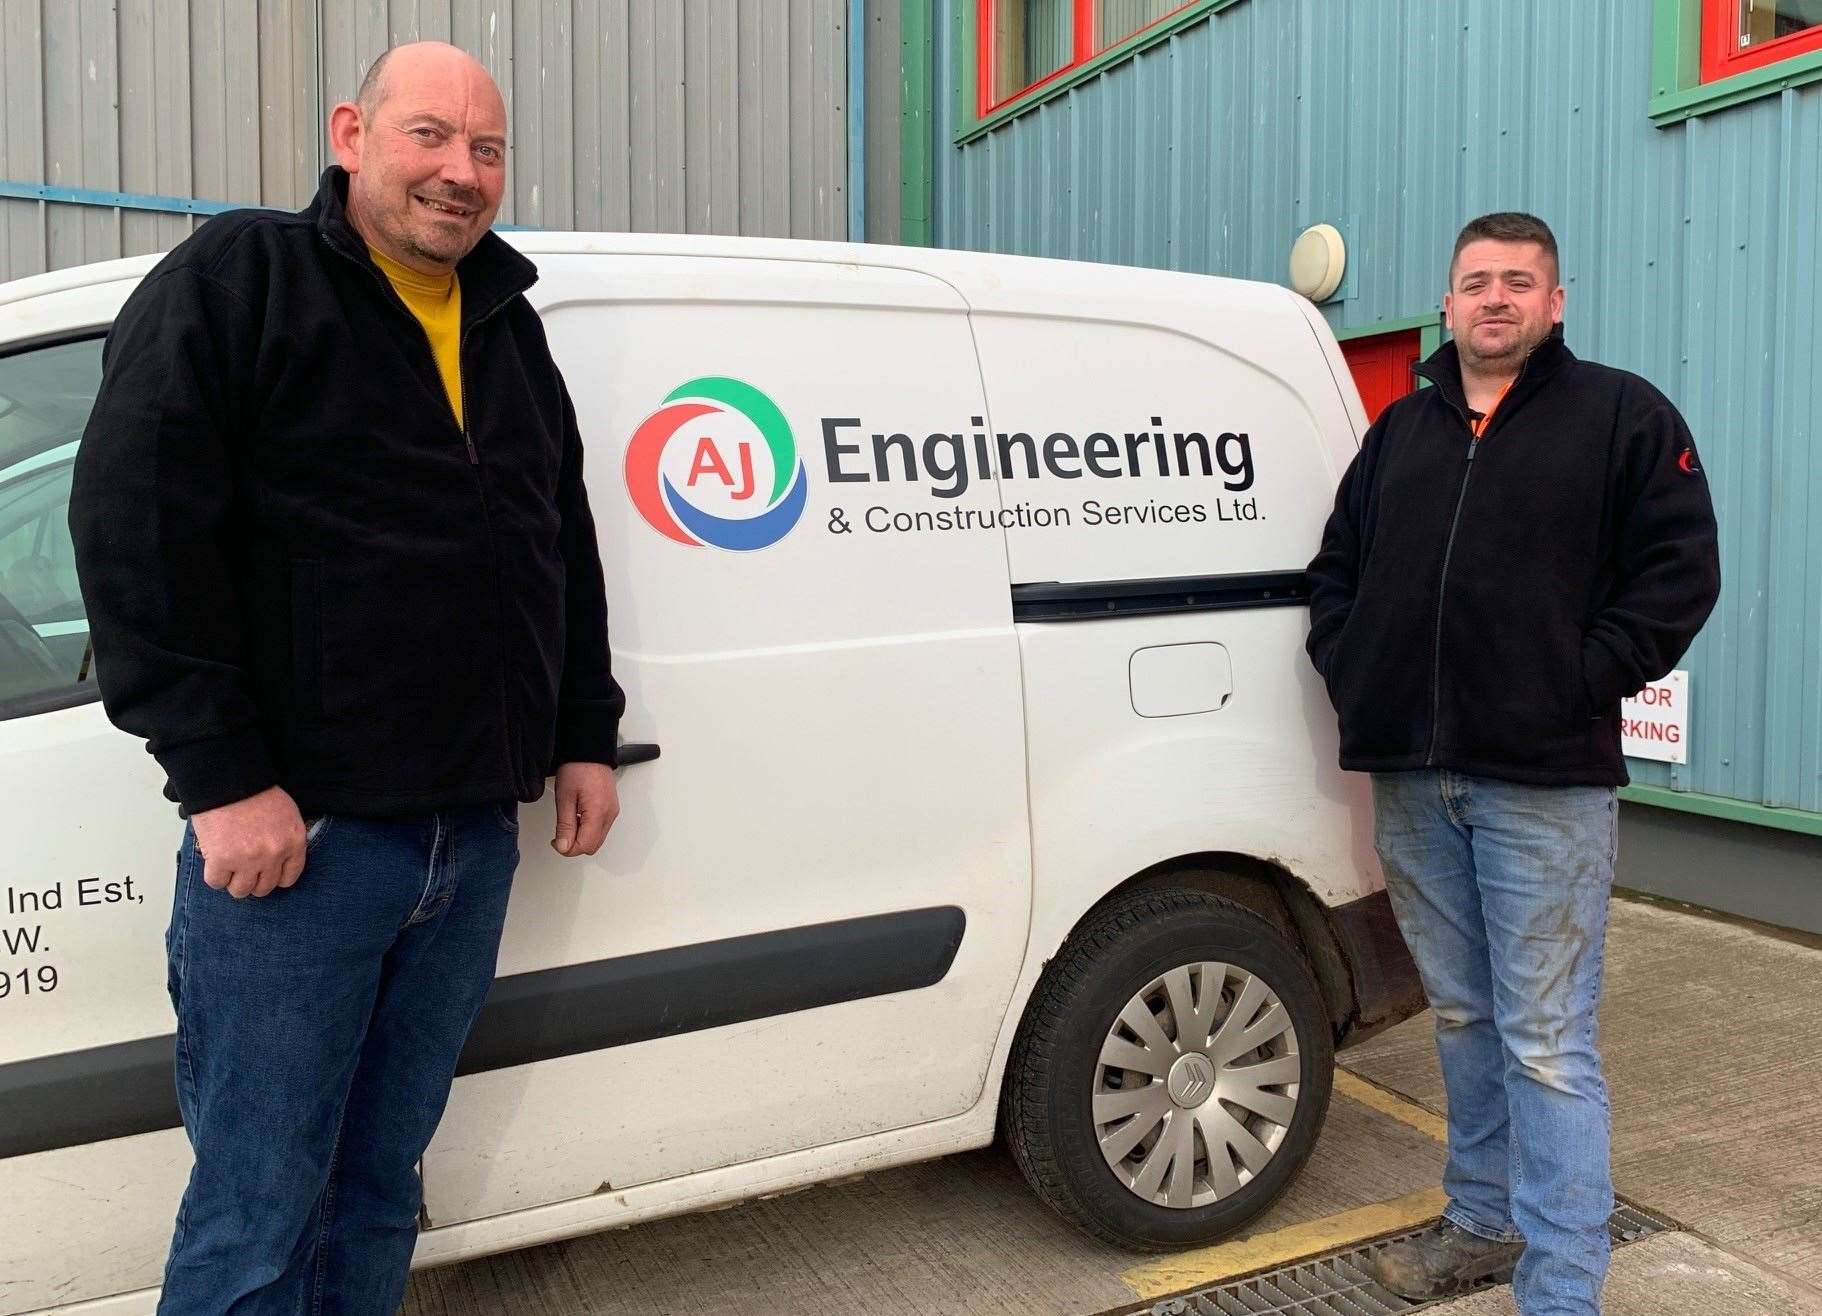 Paul Briggs and Ross Jack will be heading out to Antarctica on behalf of AJ Engineering.